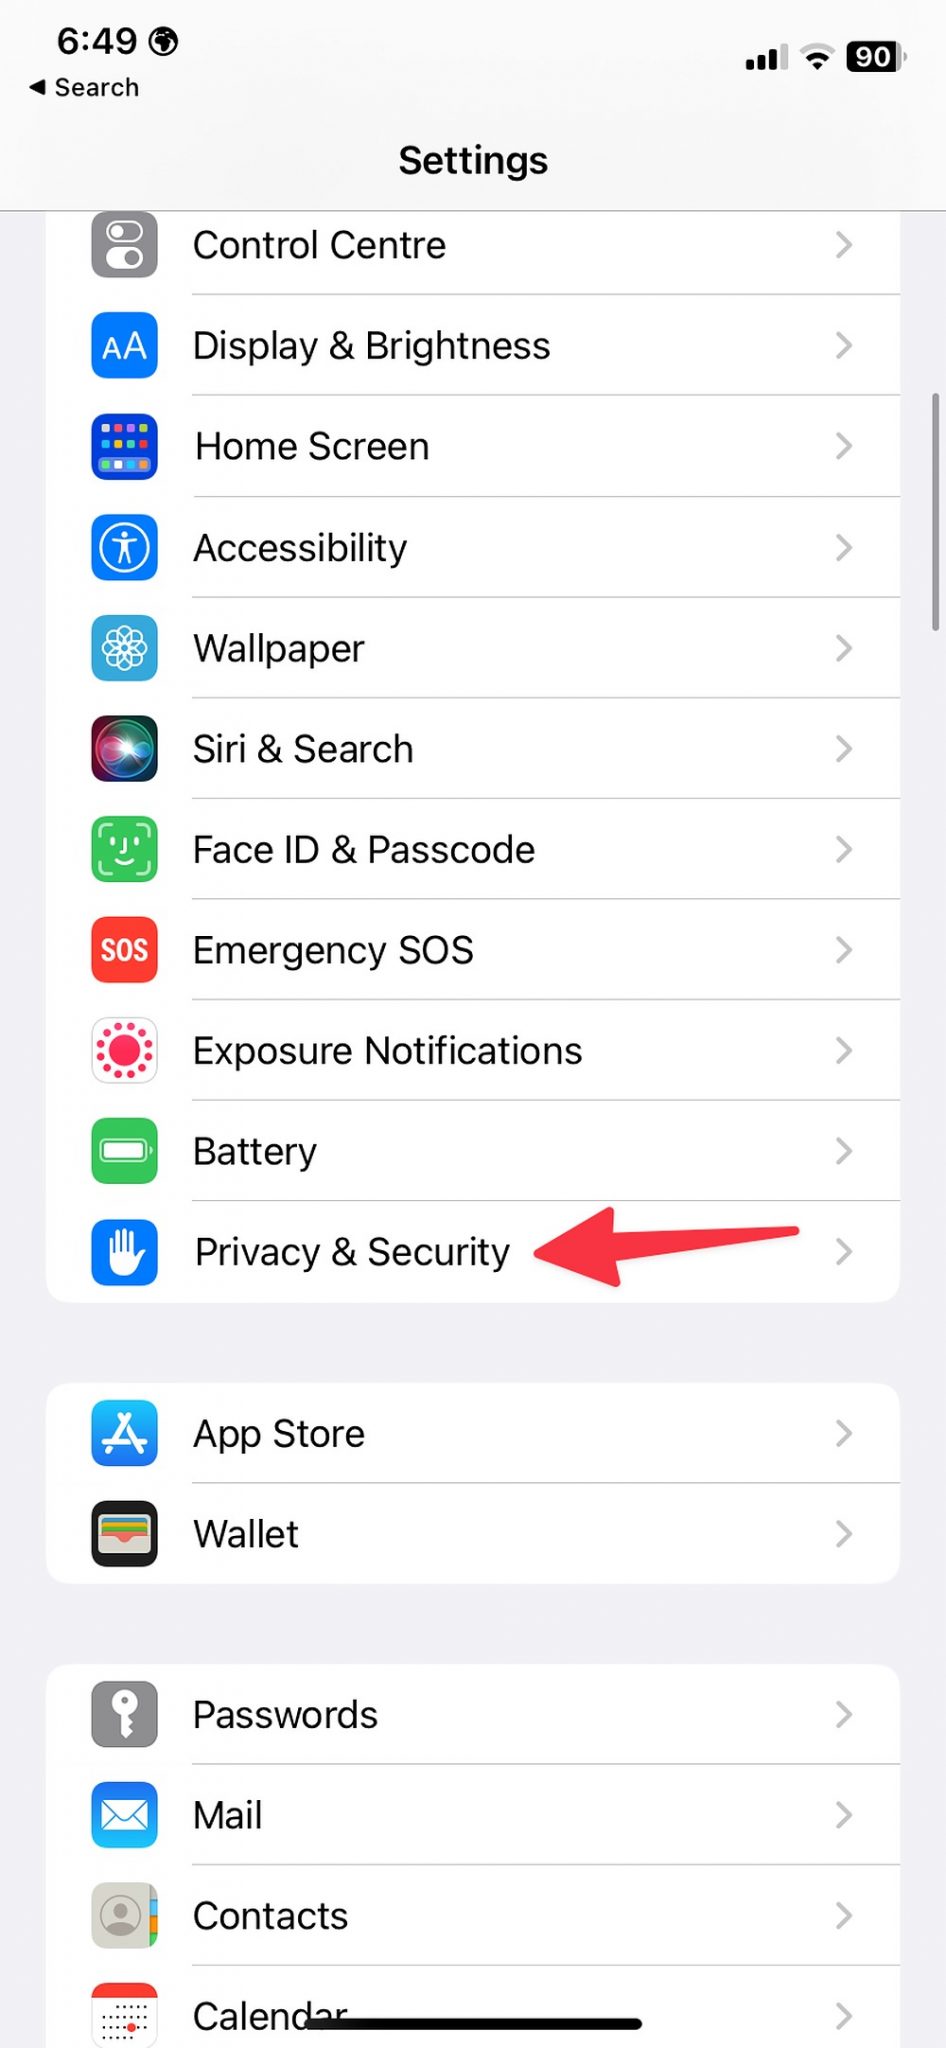 Open privacy and security on iPhone